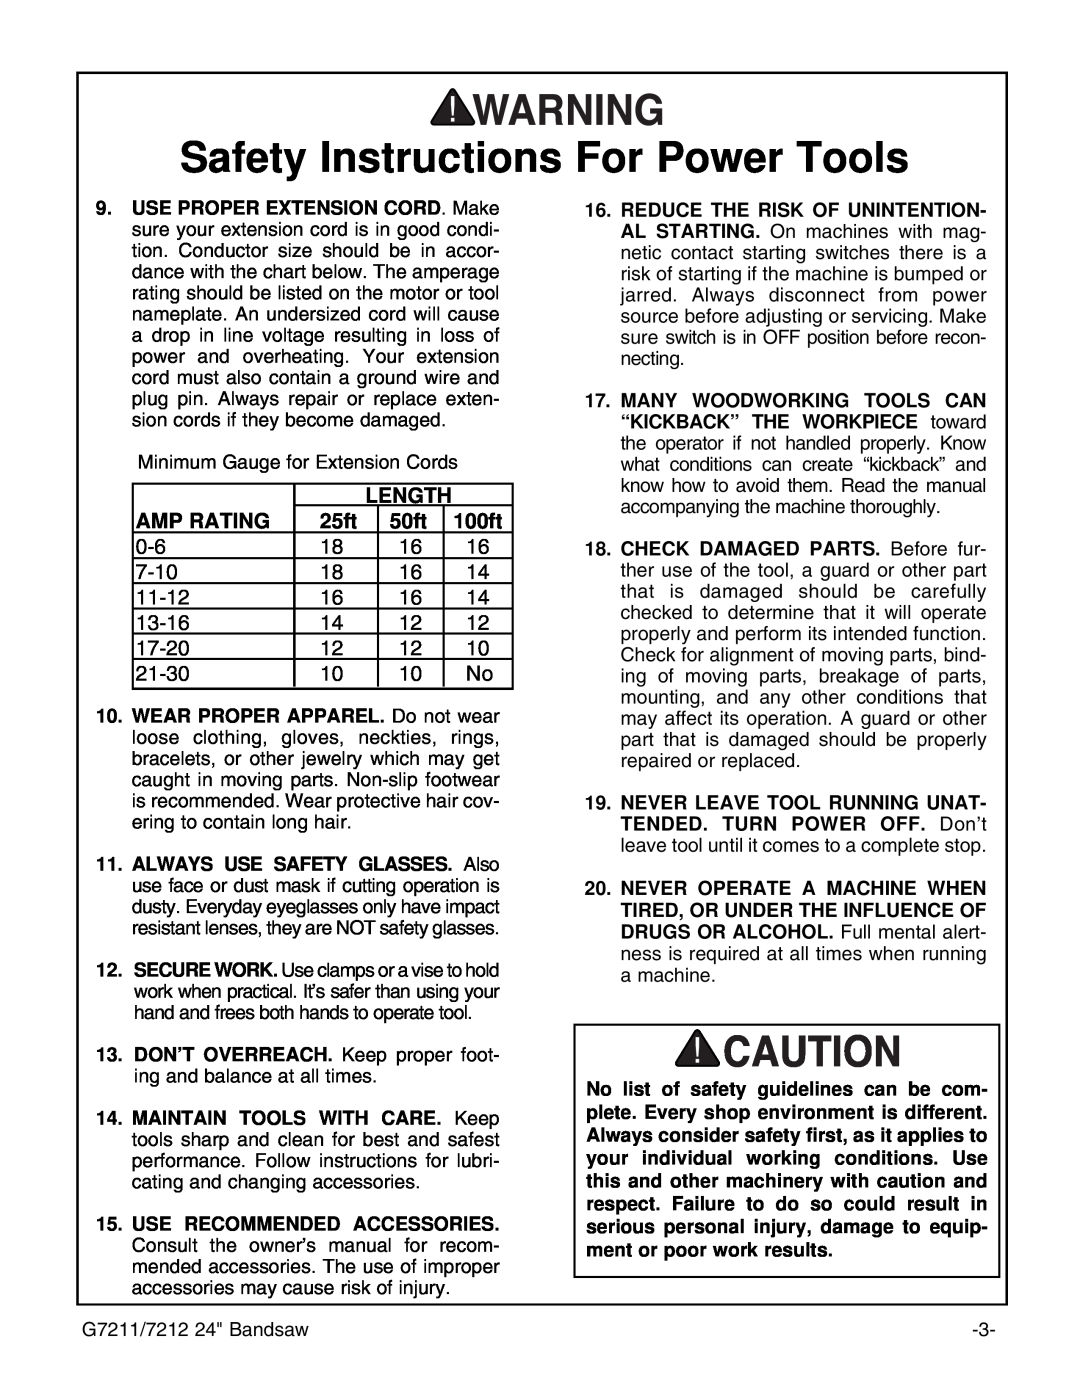 Grizzly G7211, G7212 instruction manual Safety Instructions For Power Tools, Amp Rating, 25ft, 50ft, 100ft 